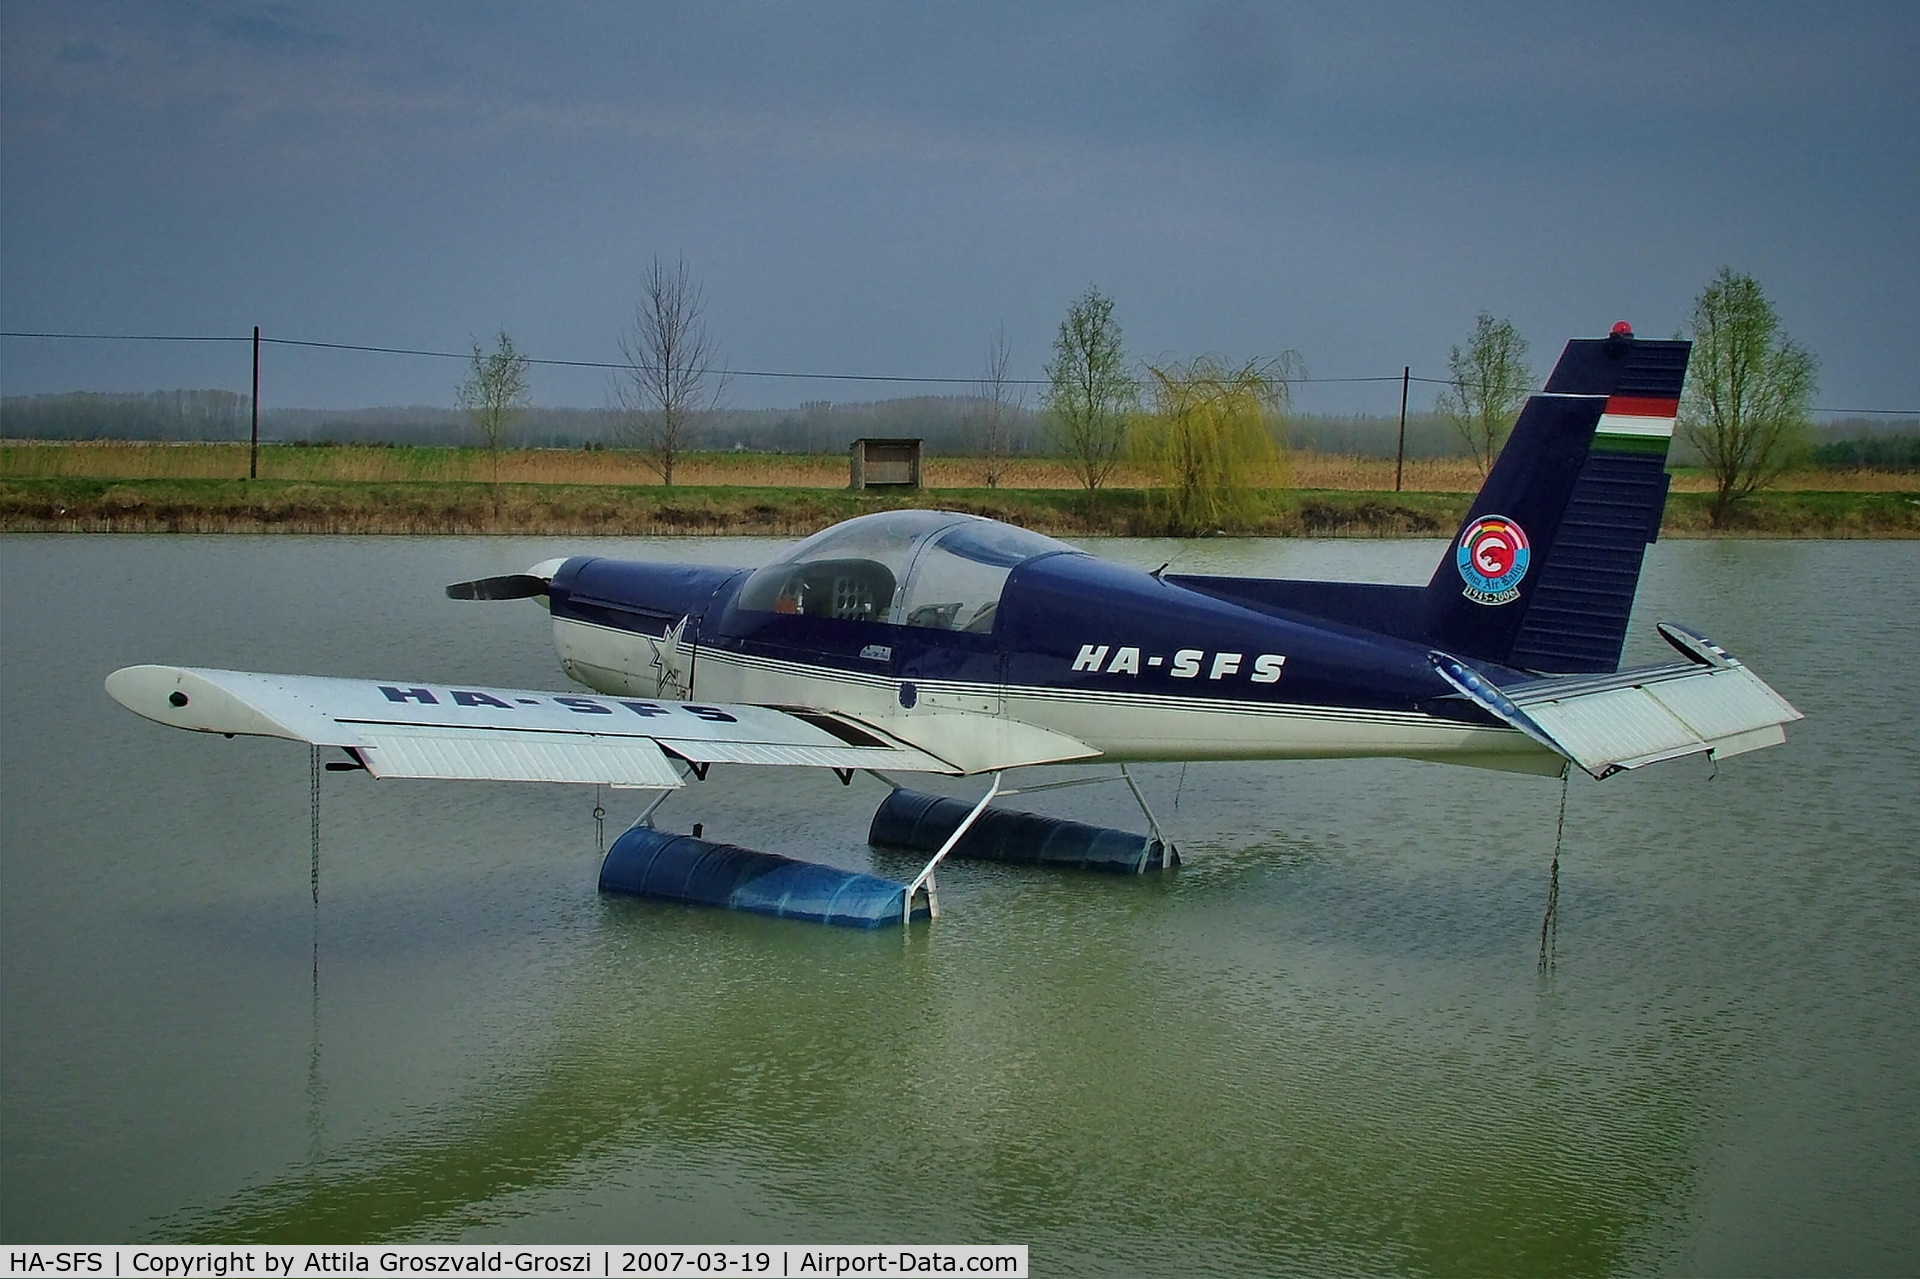 HA-SFS, 1981 Zlin Z-142 C/N 0237, Exhibited on the outskirts of Bócsa village on a fishing lake. Hungary